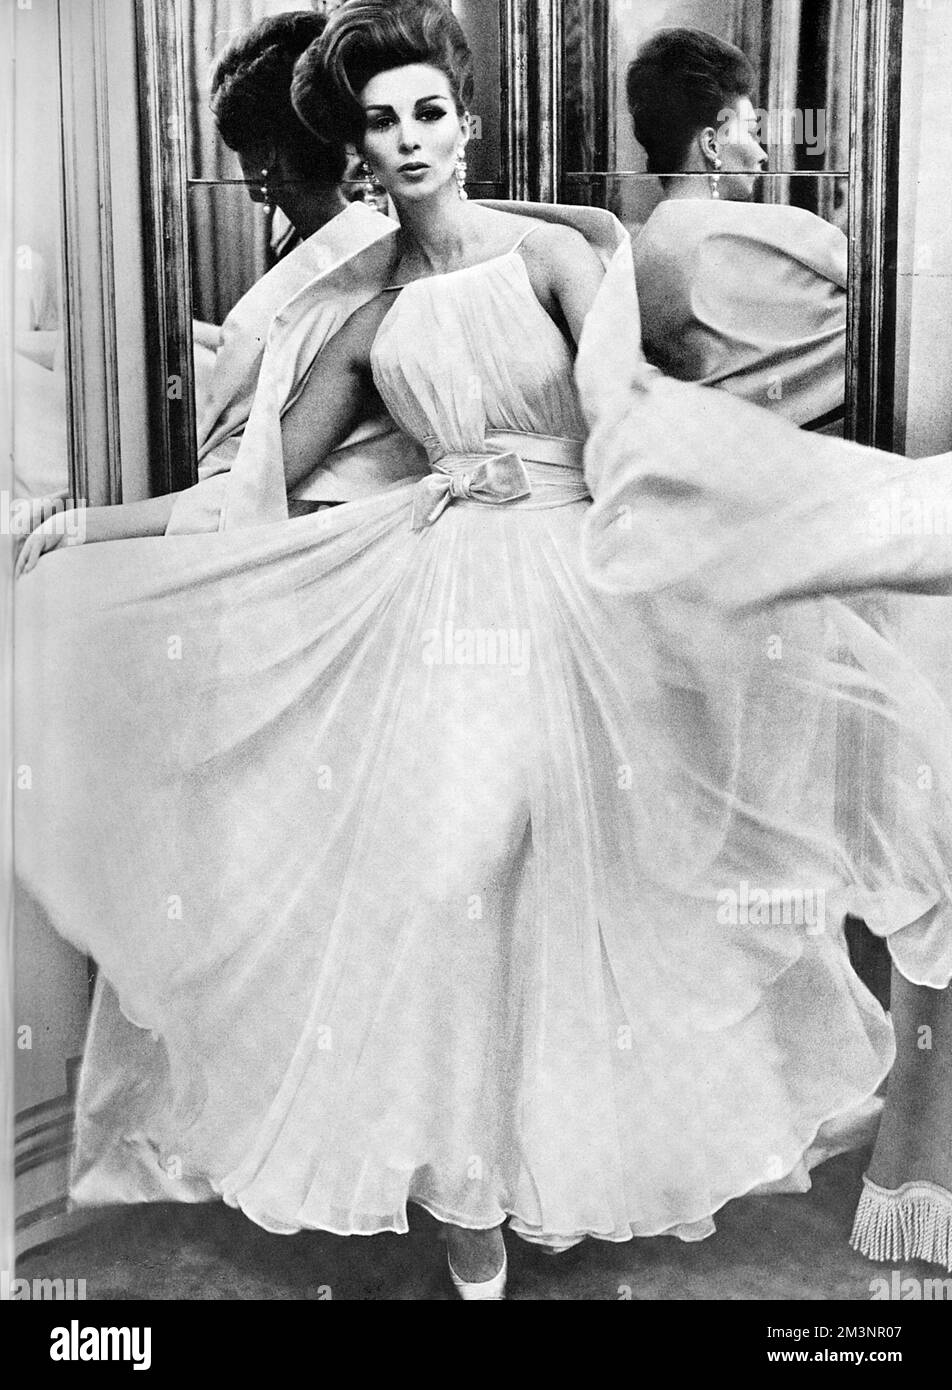 The return of the ballgown 'a la Grecque'; a pearly white chiffon dress with flounced skirt and shoestring strapped bodice swathed at the waist and accentuated by a bow of pink satin, worn with chandalier earrings in pearl and diamond.  By Balmain.     Date: 1962 Stock Photo